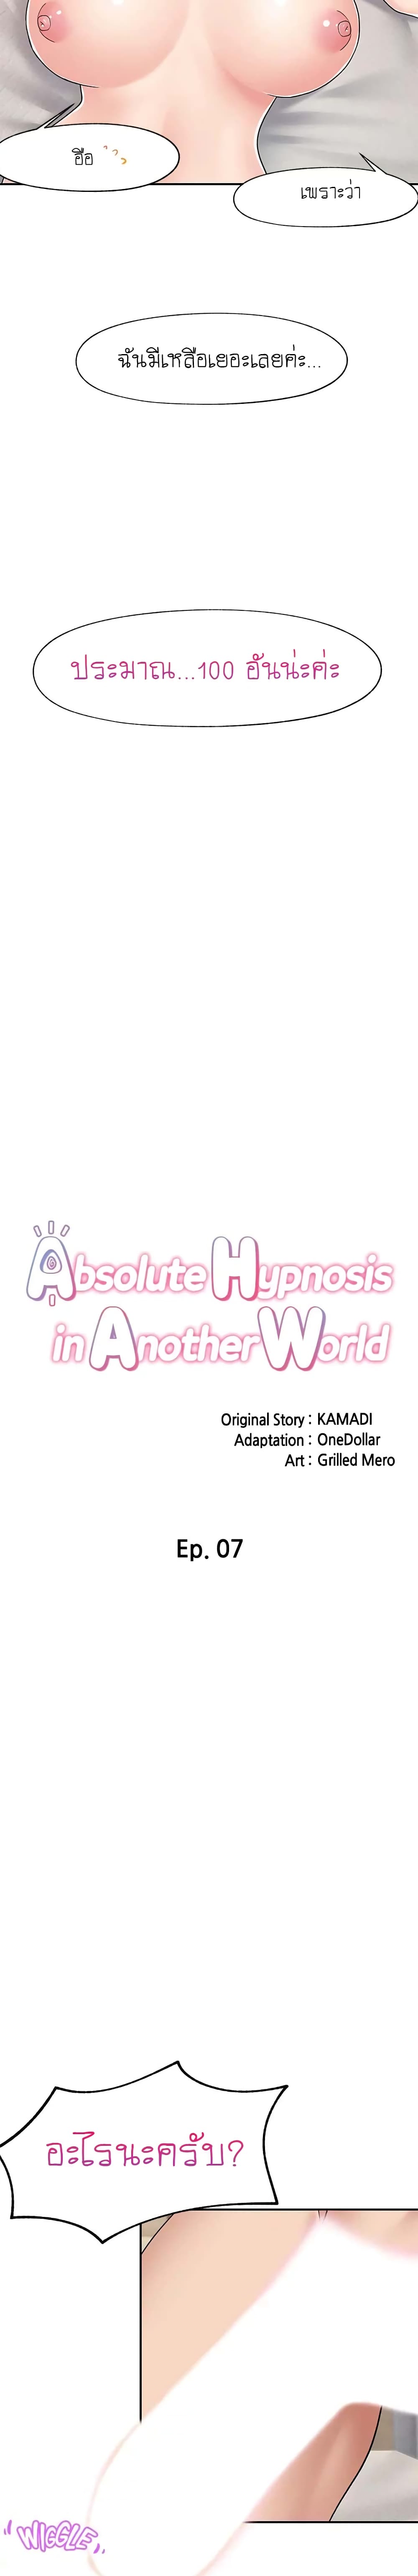 Absolute Hypnosis in Another World 7-7